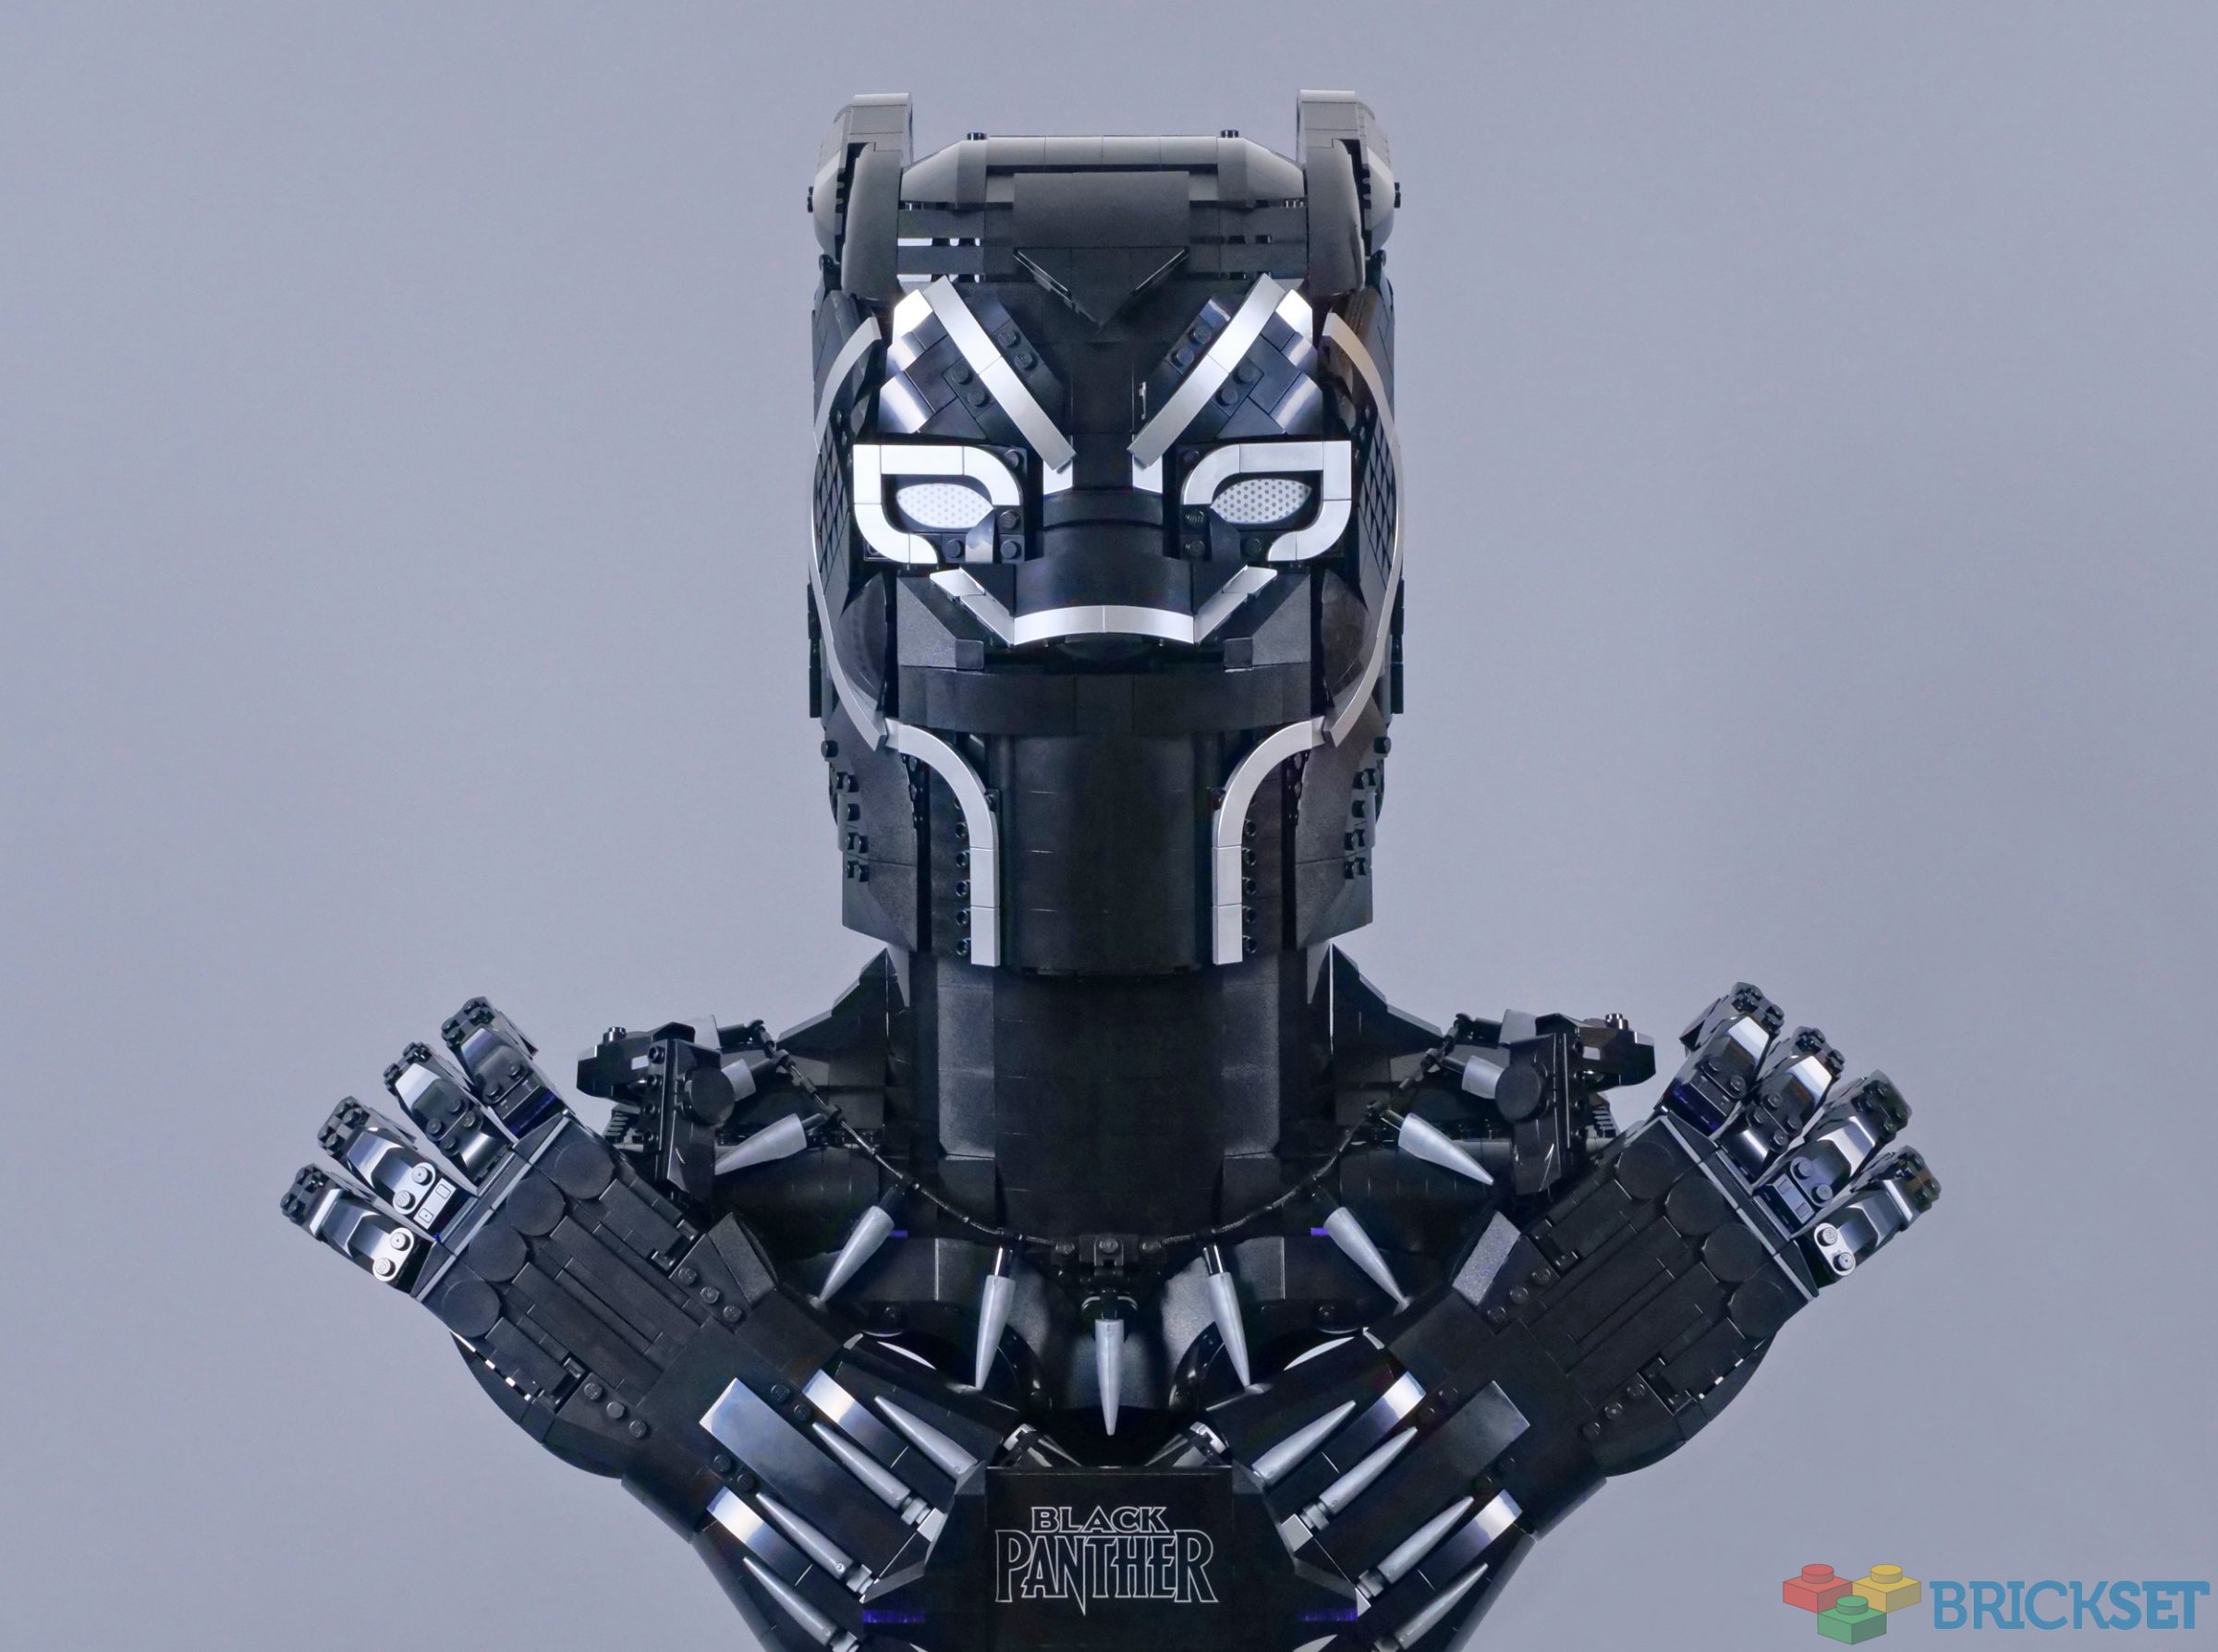 The First Two 'Black Panther' LEGO Sets Are Now Available to Order